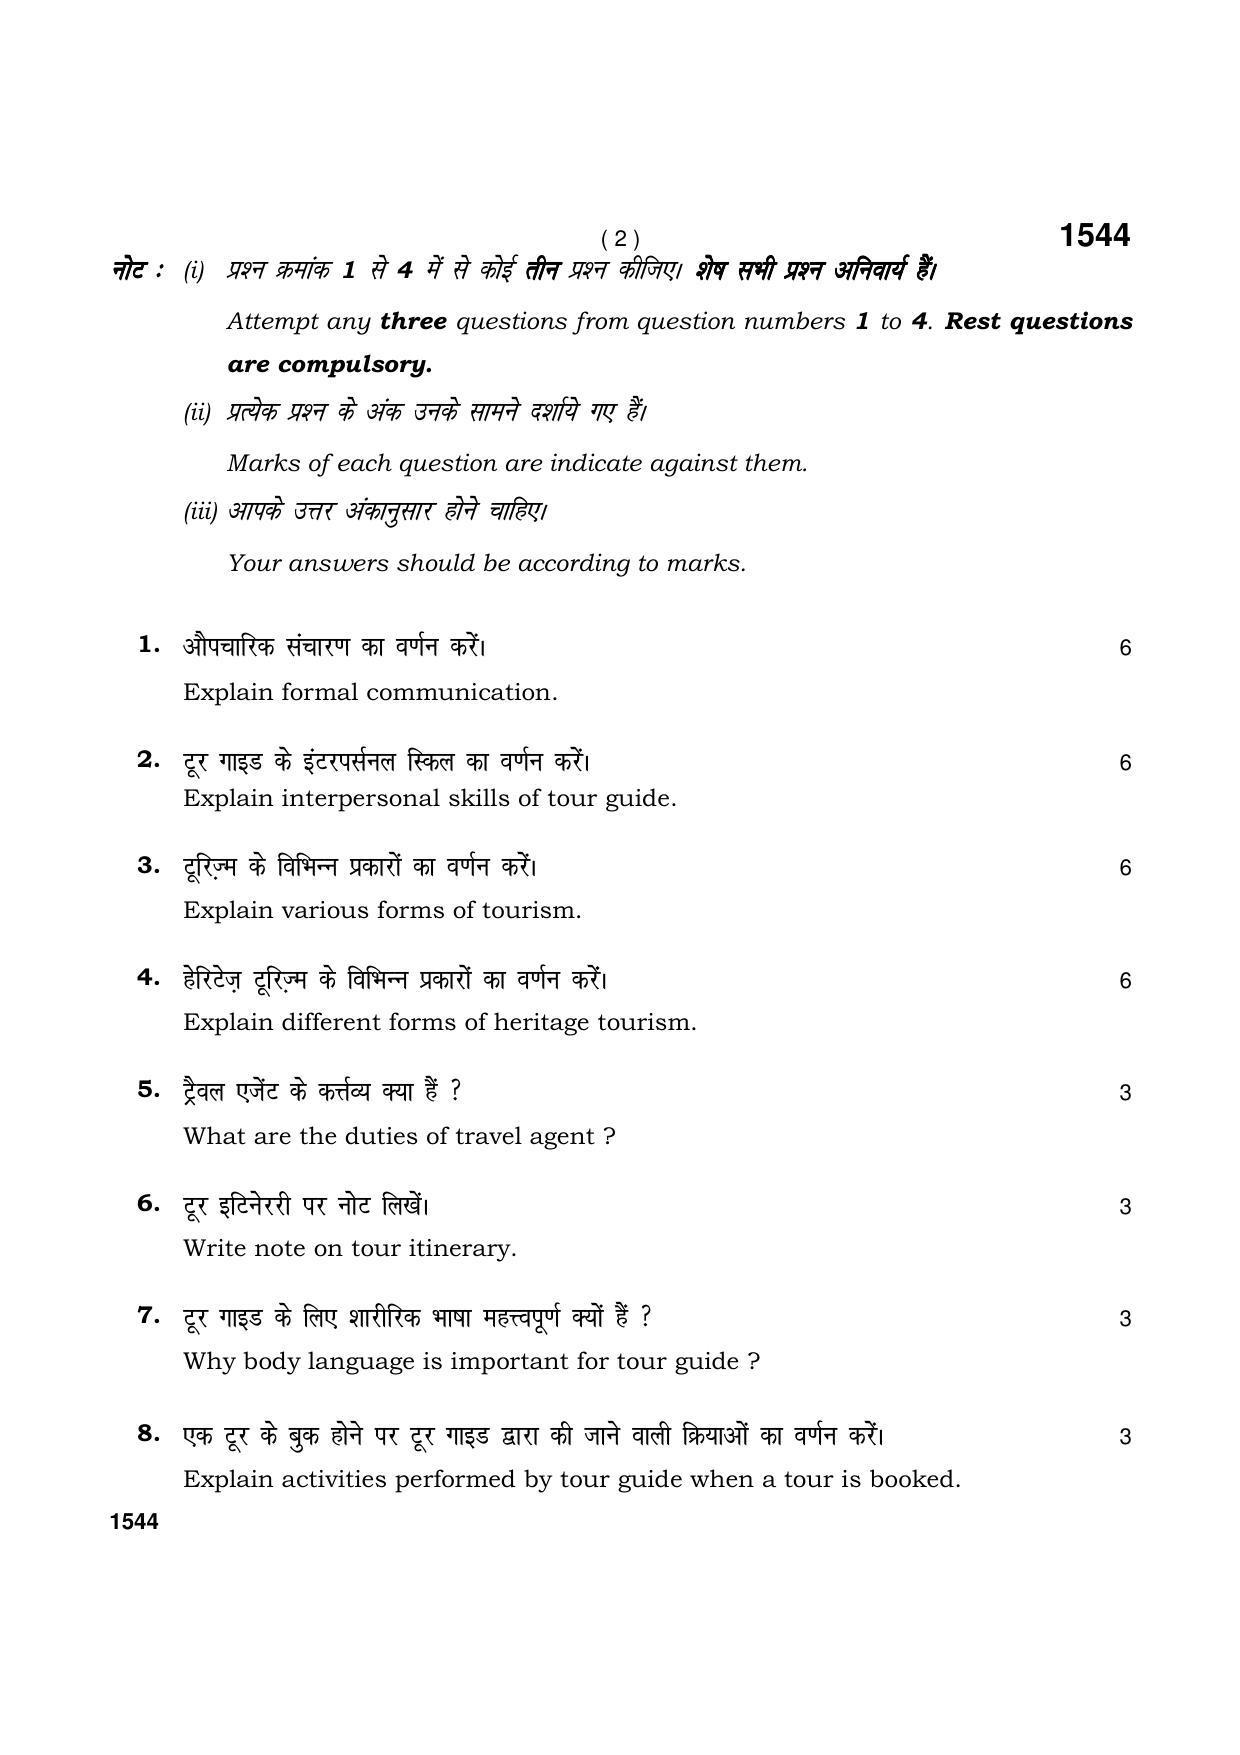 Haryana Board HBSE Class 11 Tourism Hospitality 2021 Question Paper - Page 2